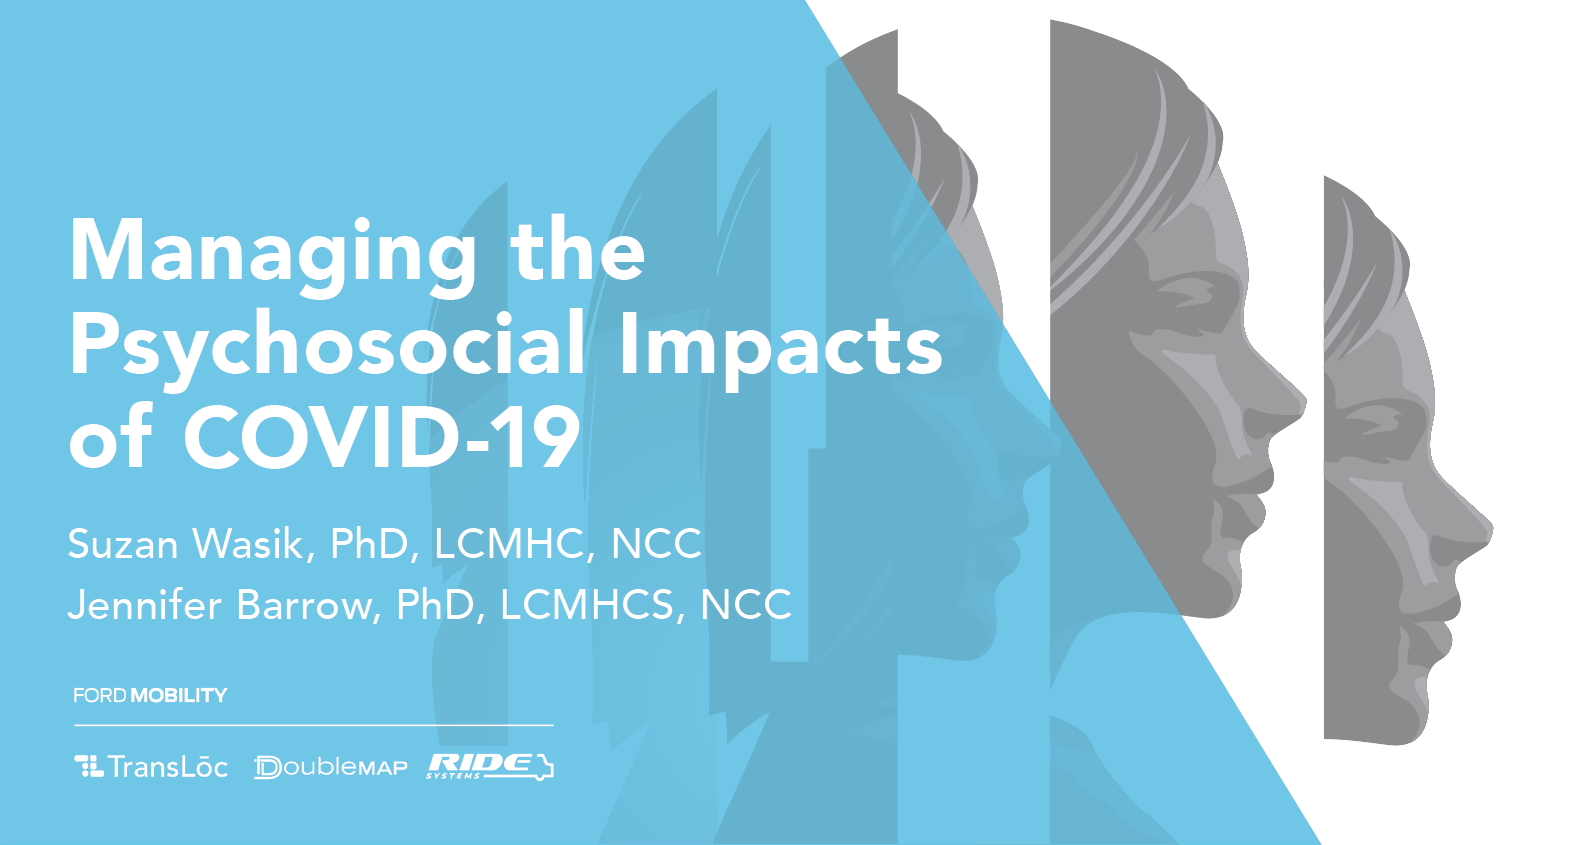 Managing the psychosocial impacts of Covid-19